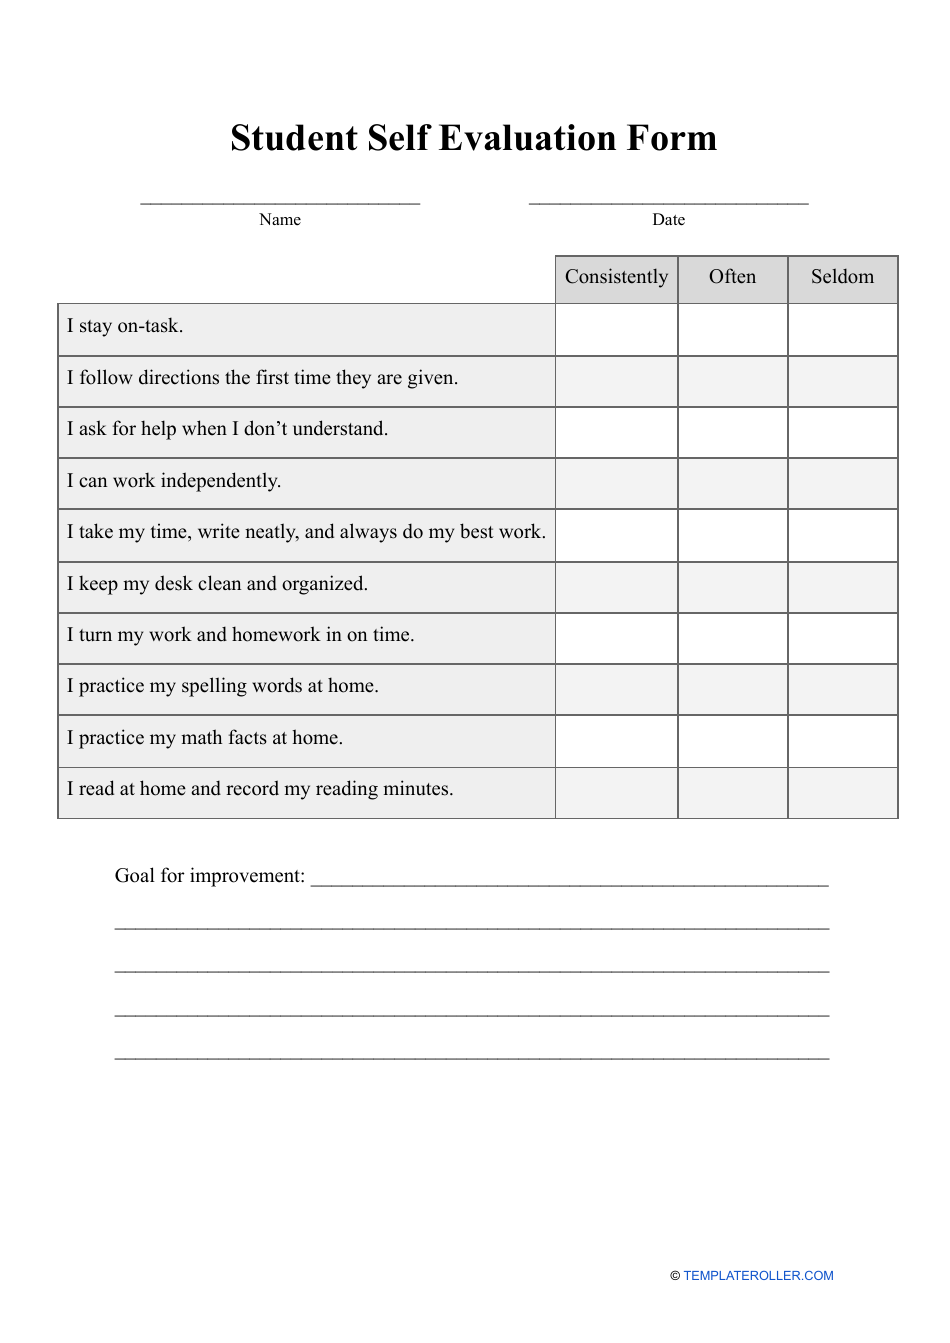 Student Self Evaluation Form, Page 1